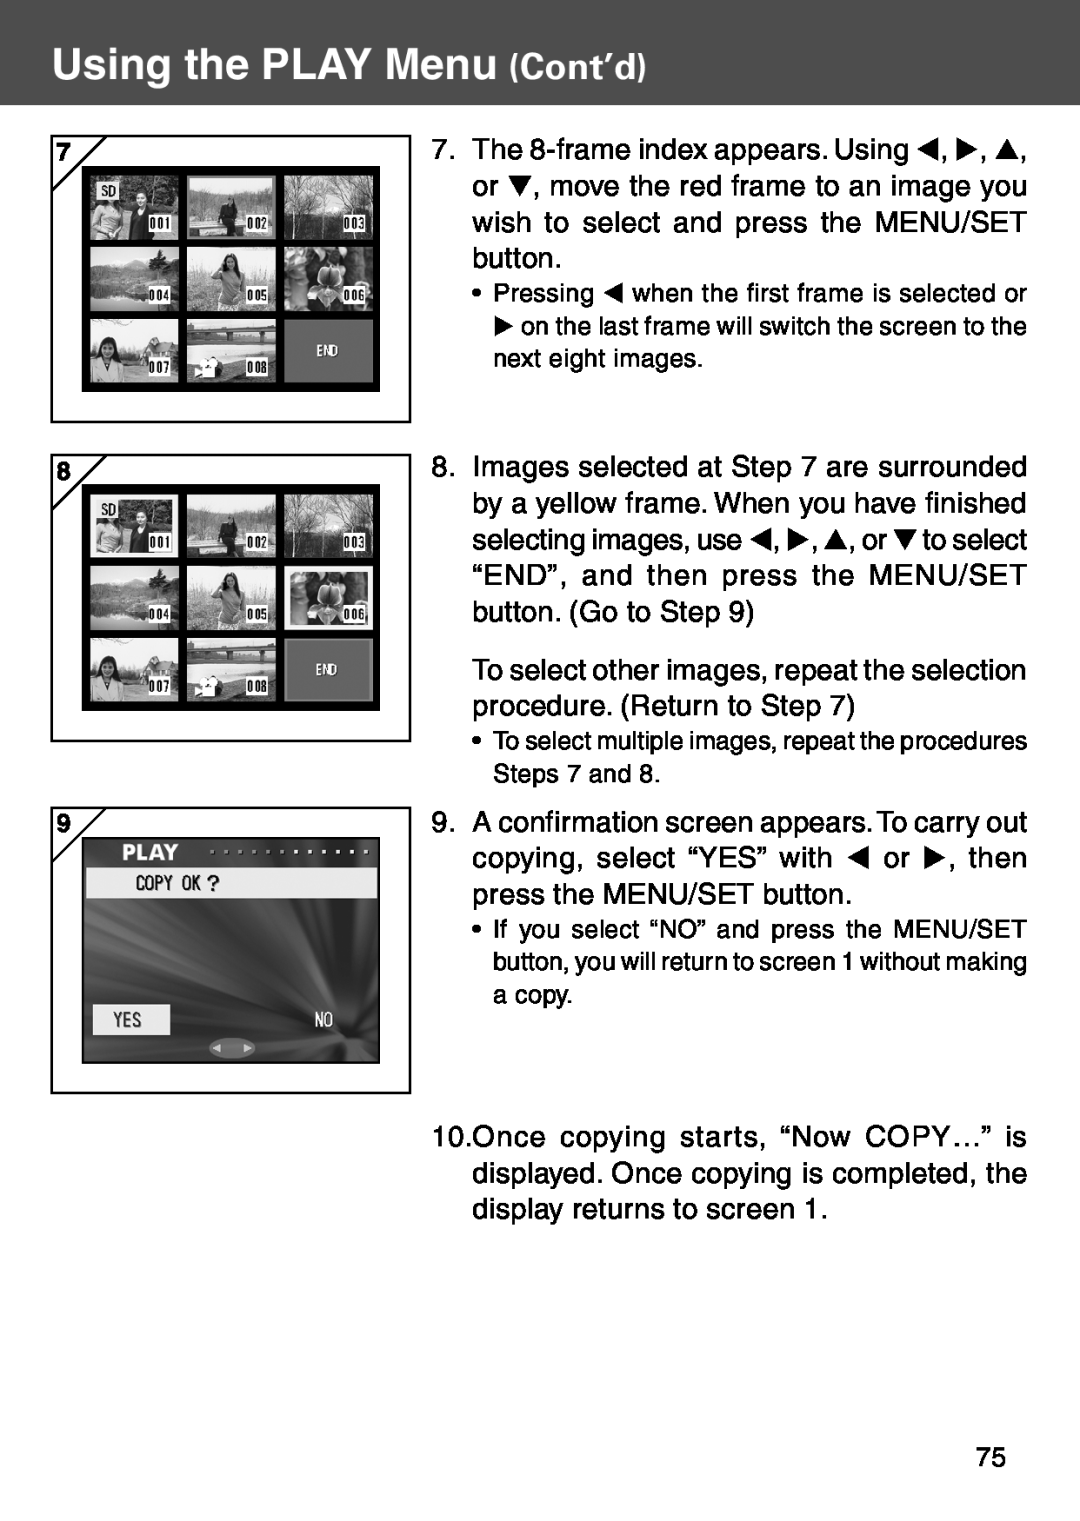 Konica Minolta KD-500Z user manual Using the PLAY Menu Cont’d, The 8-frame index appears. Using 